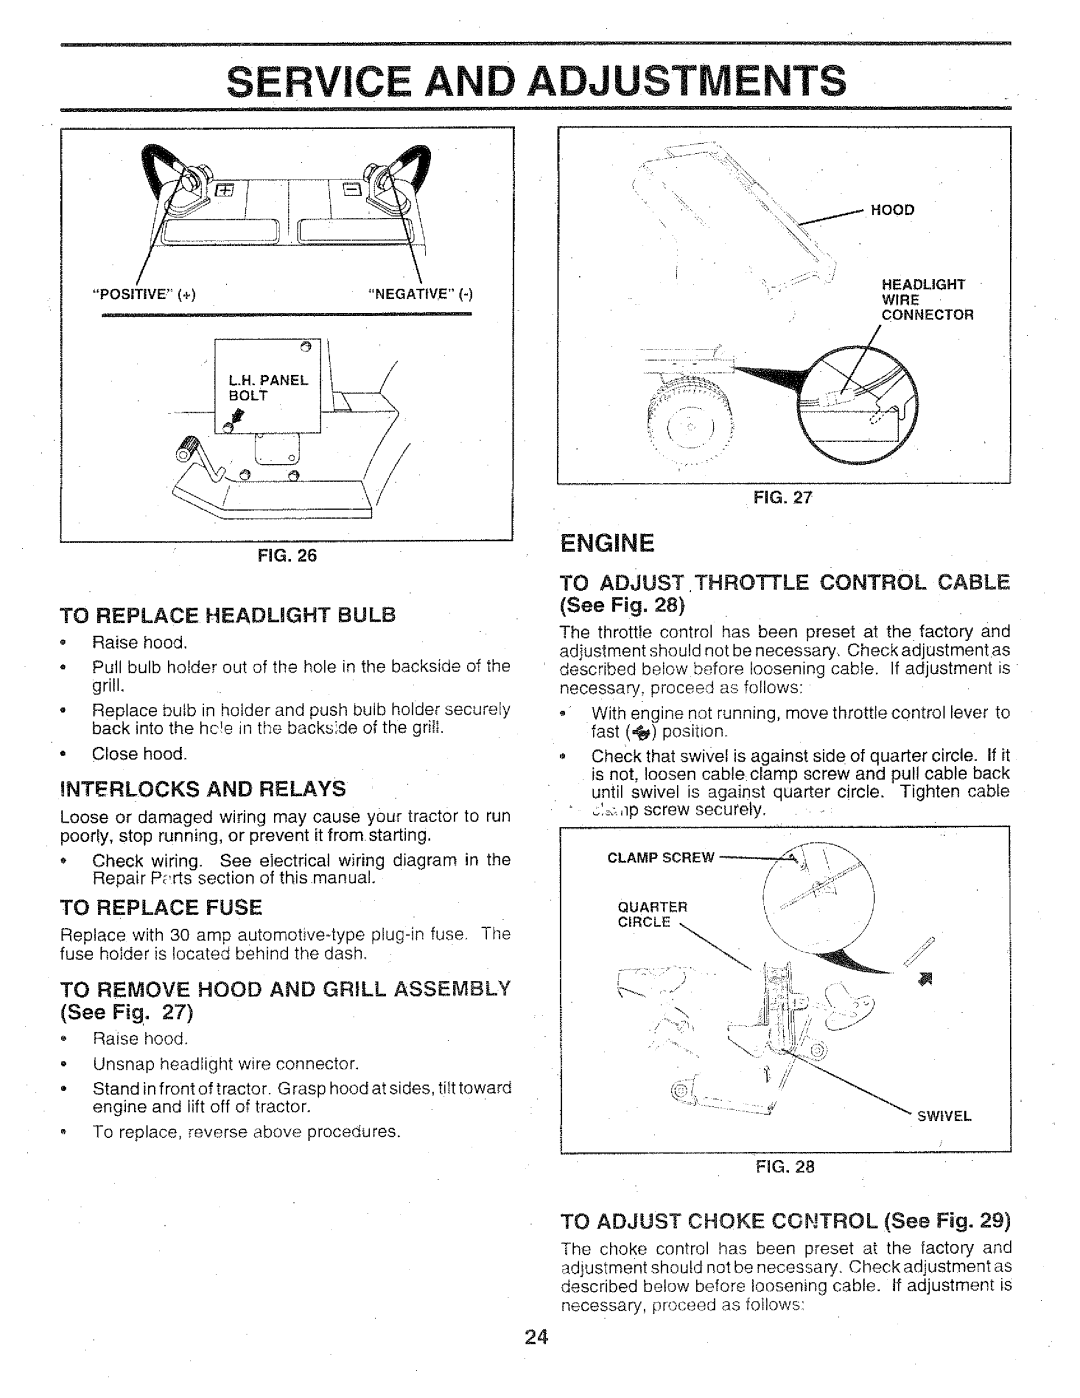 Sears 917.25147 To Replace Headlight Bulb, To Adjust Throttle Control Cable, TO ADJUST CHOKE CONTROL See Fig, Engine 